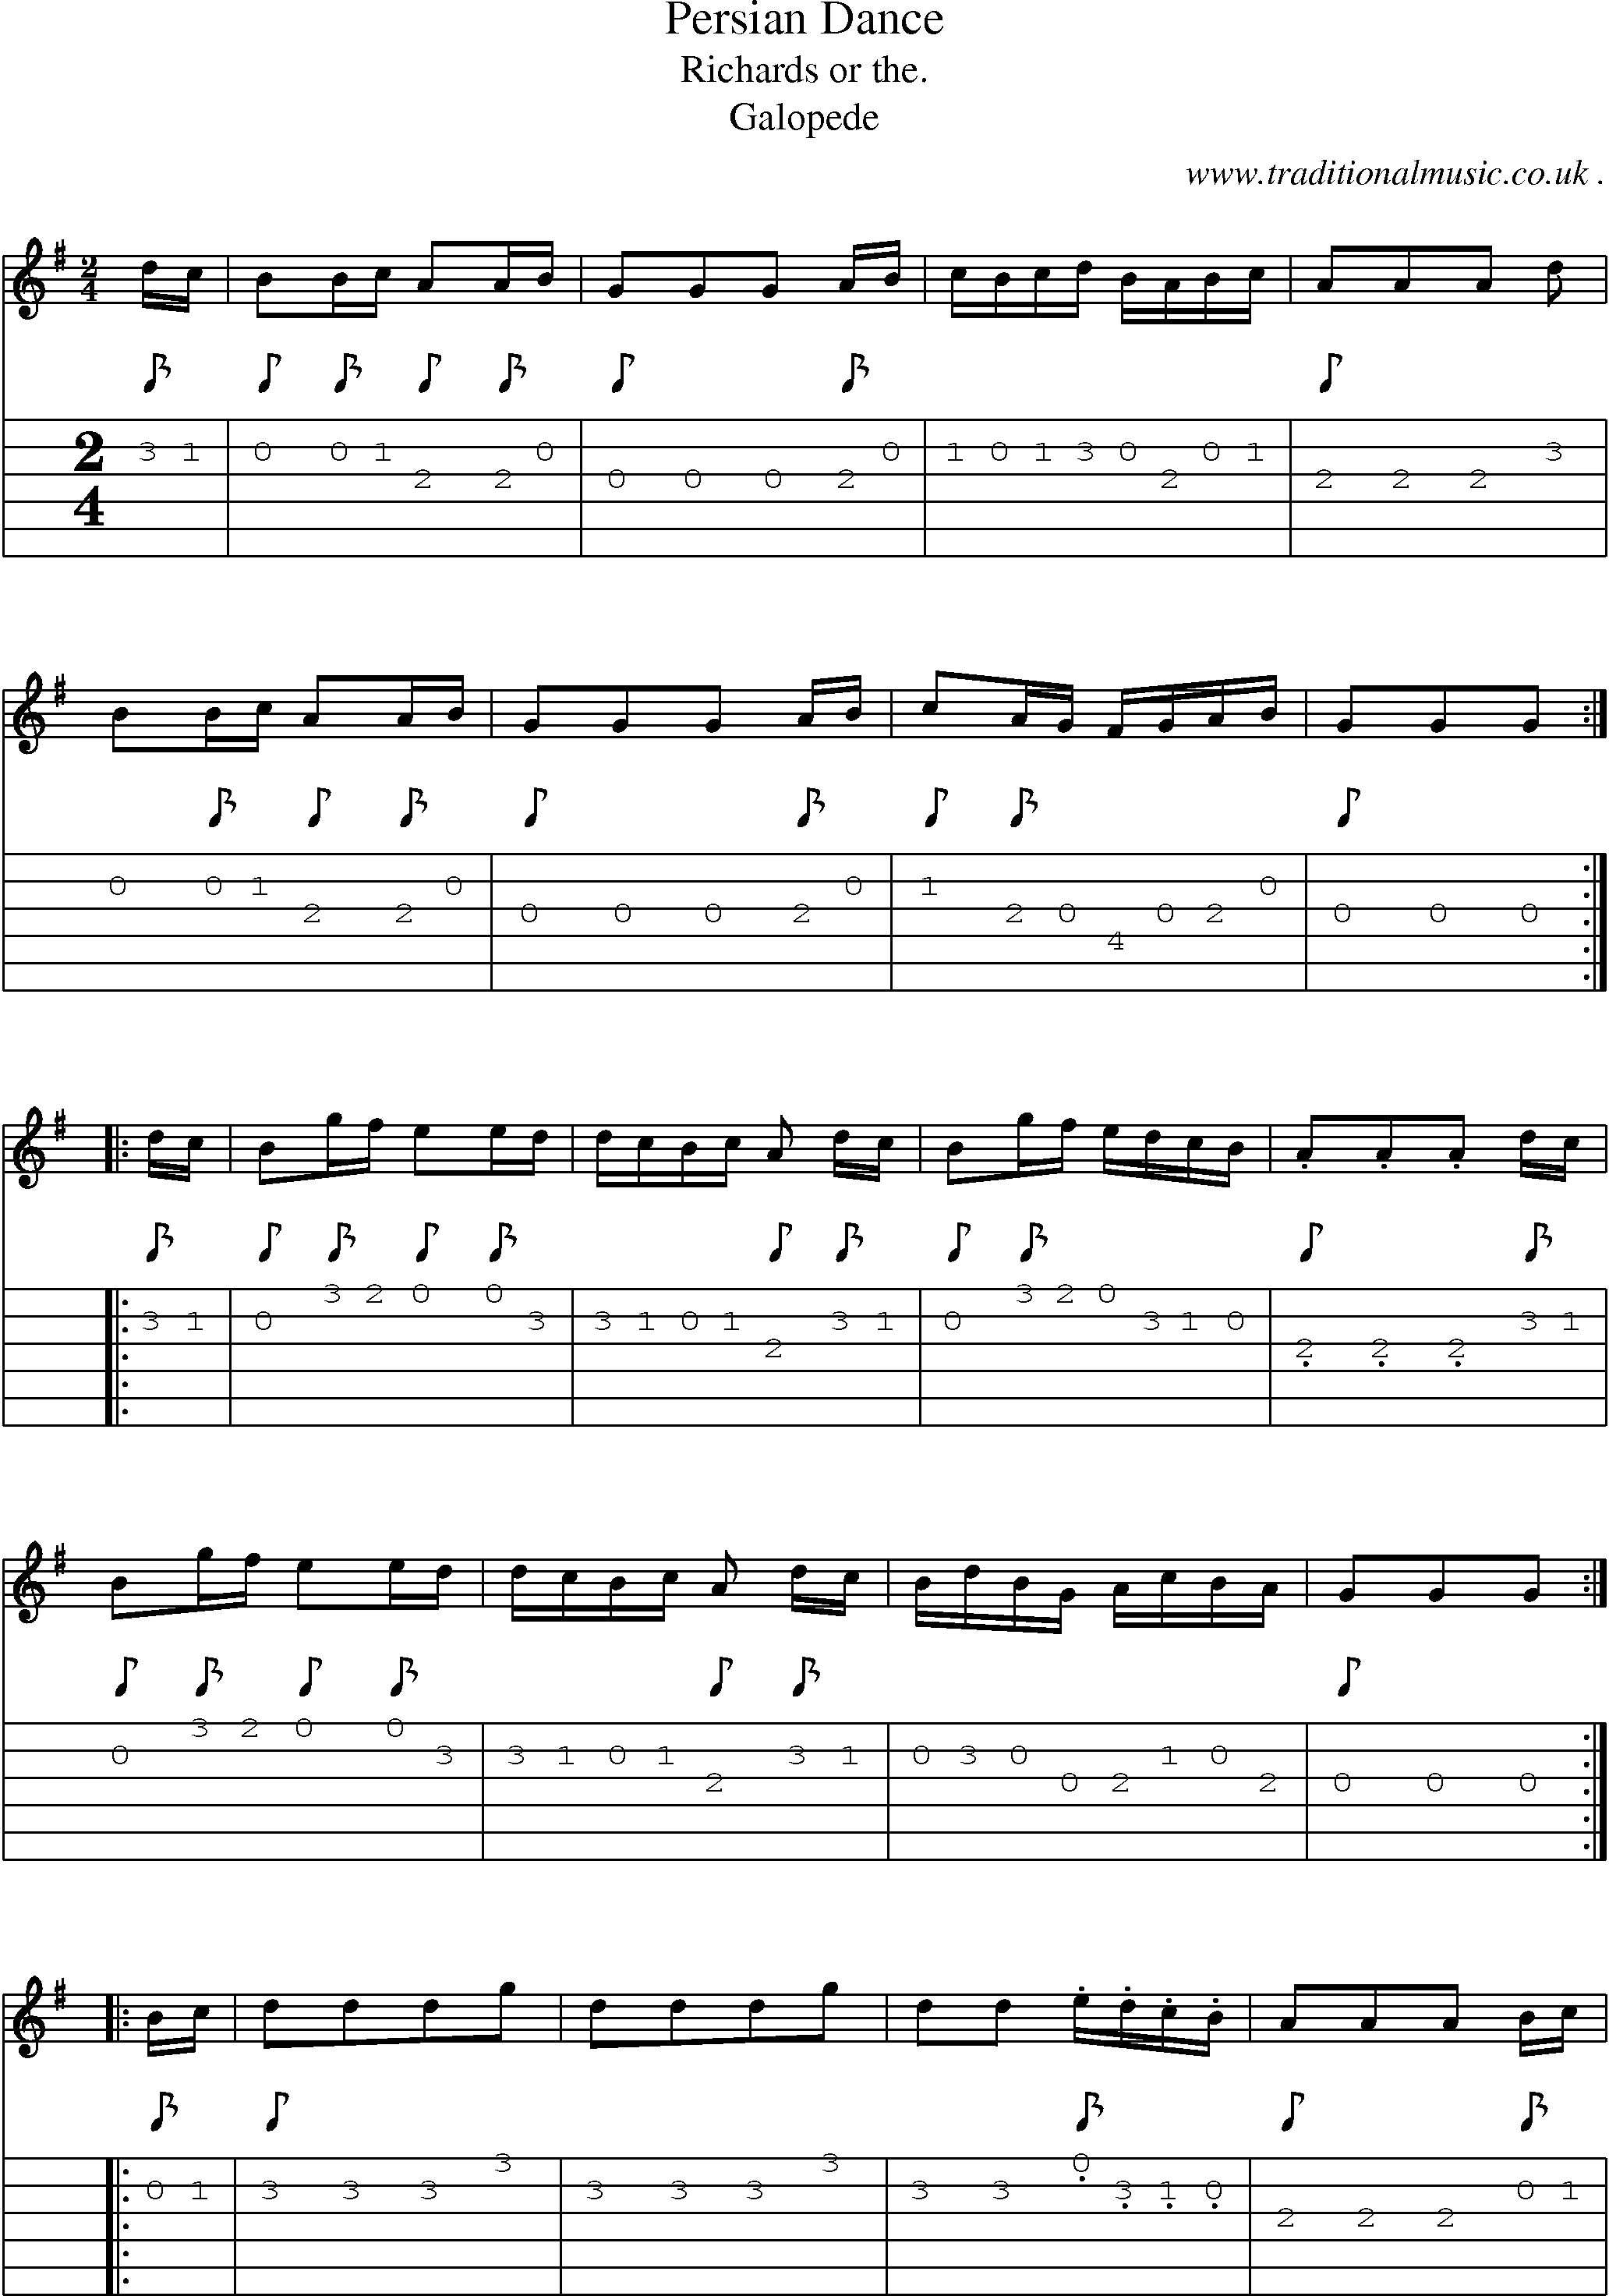 Sheet-Music and Guitar Tabs for Persian Dance